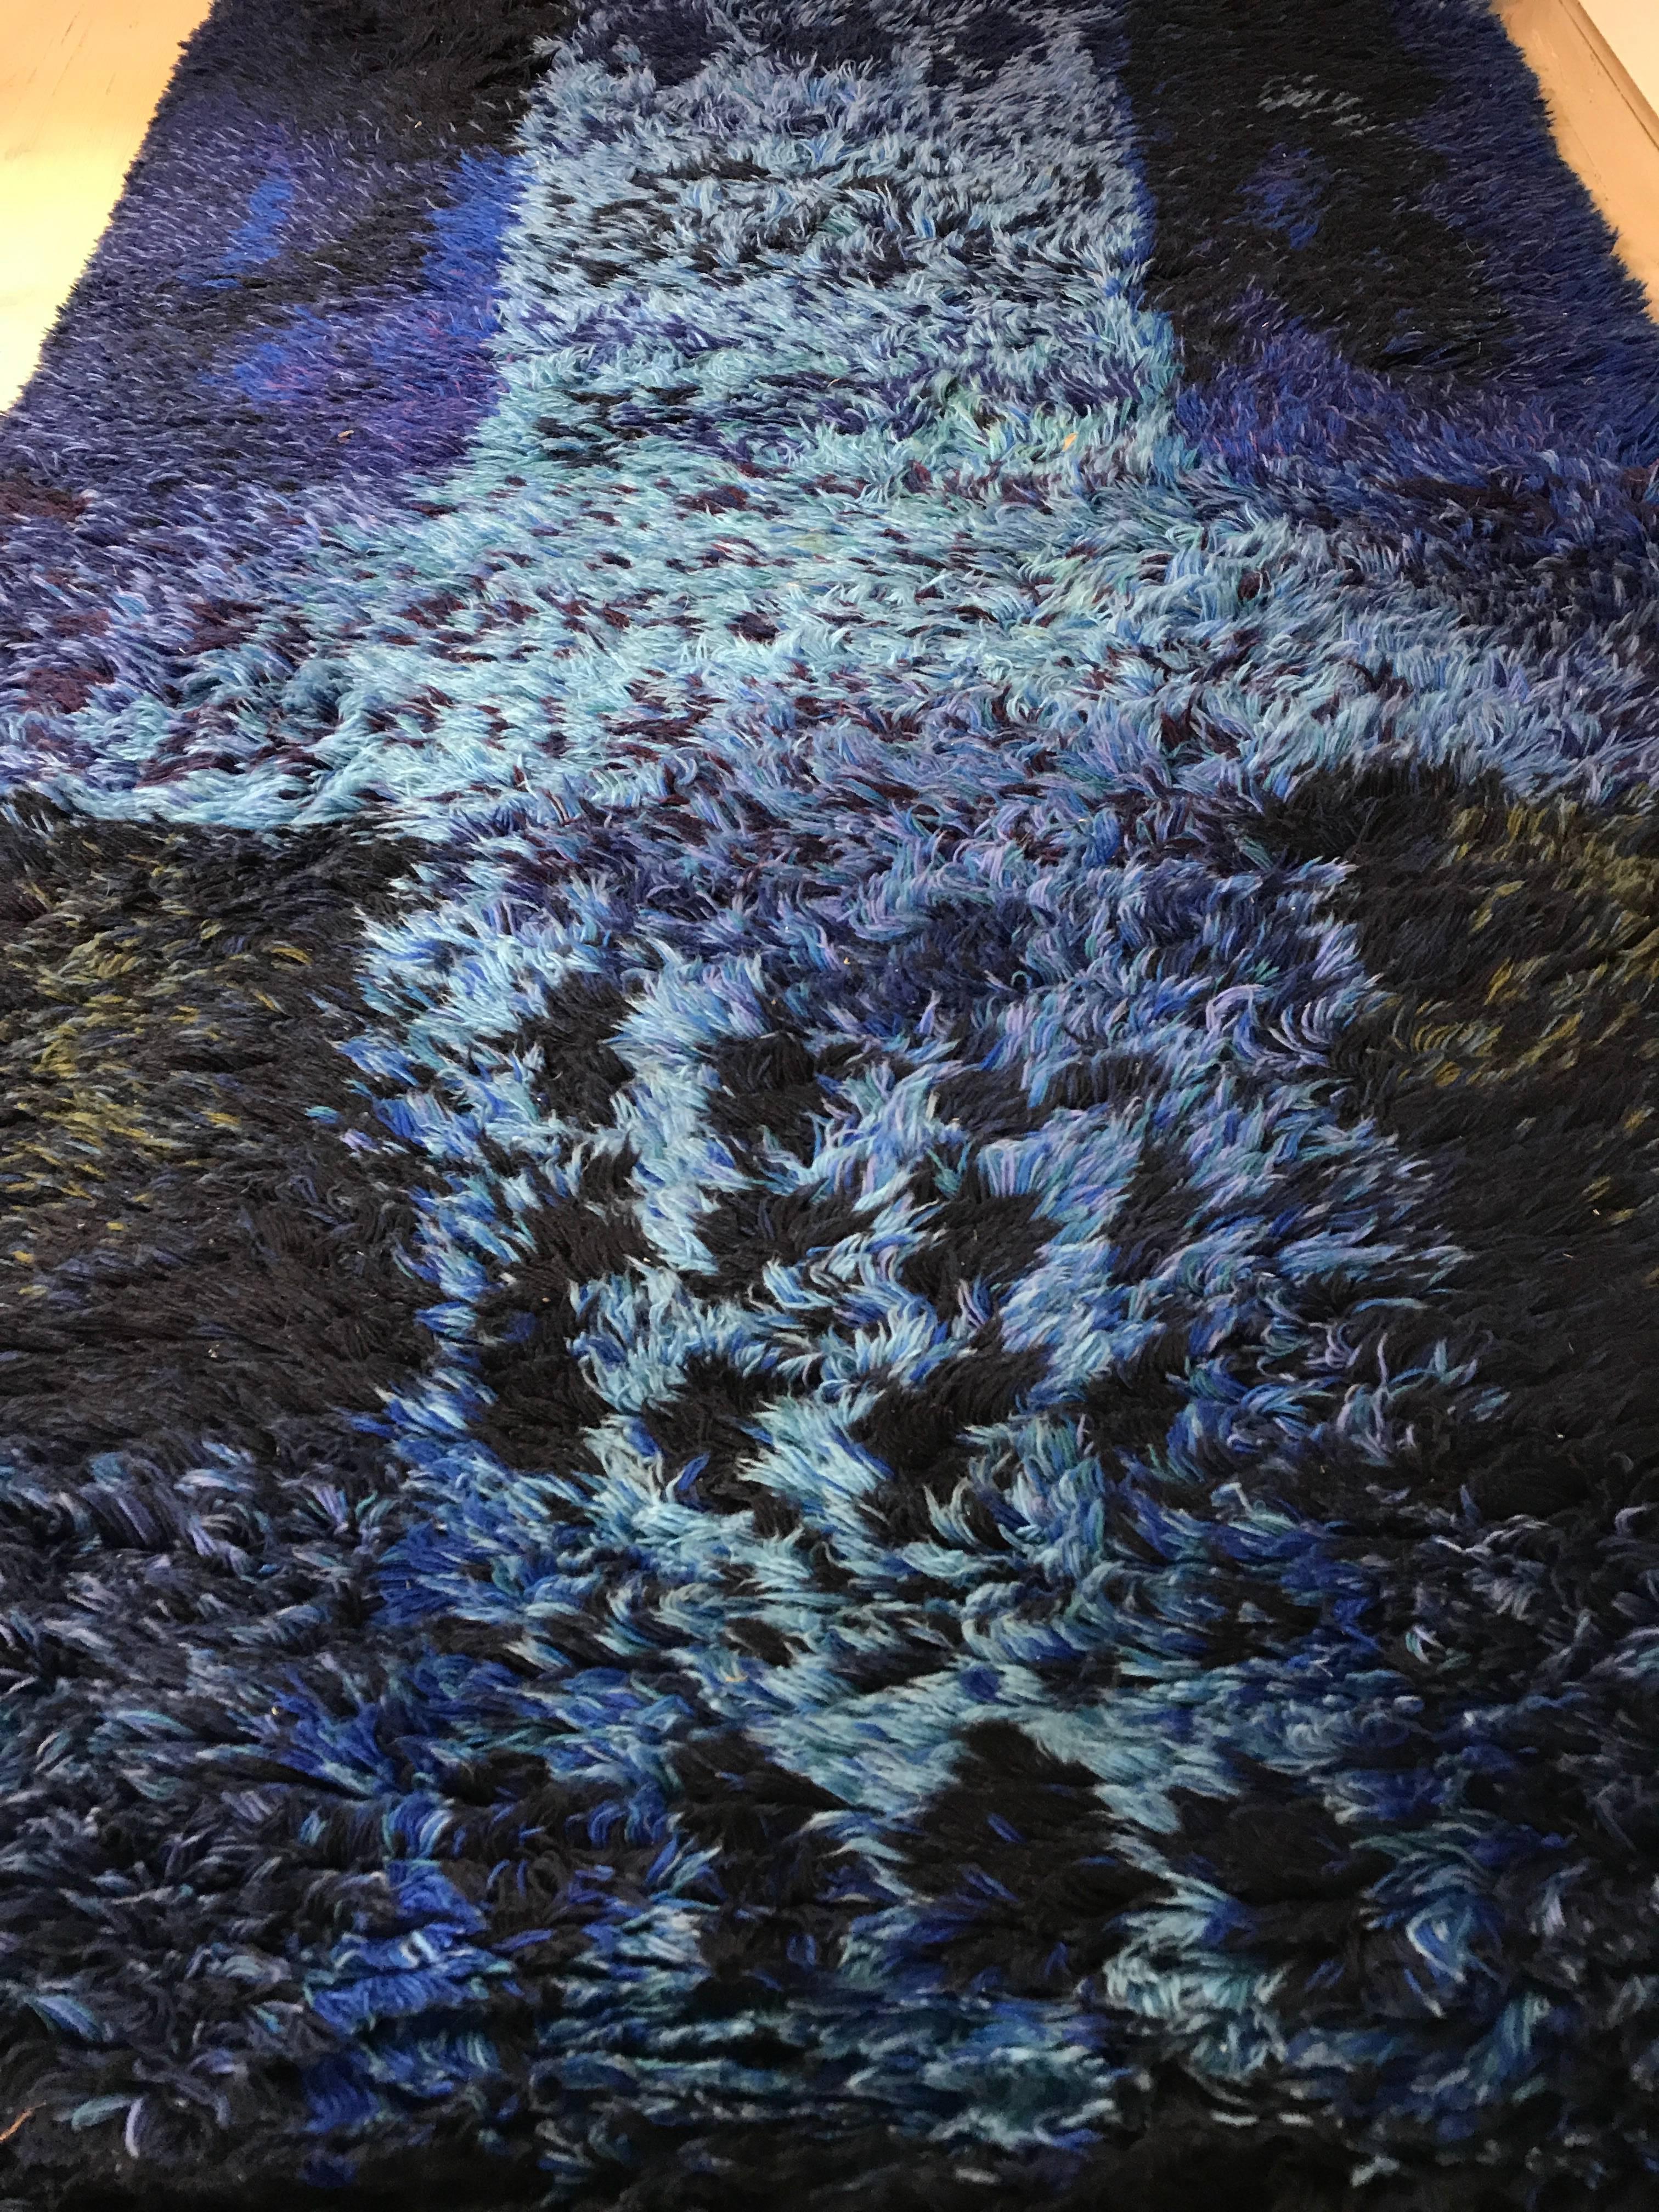 A blue Scandinavian Rya rug by Ritva Puotila. Excellent example with deep vibrant colors.